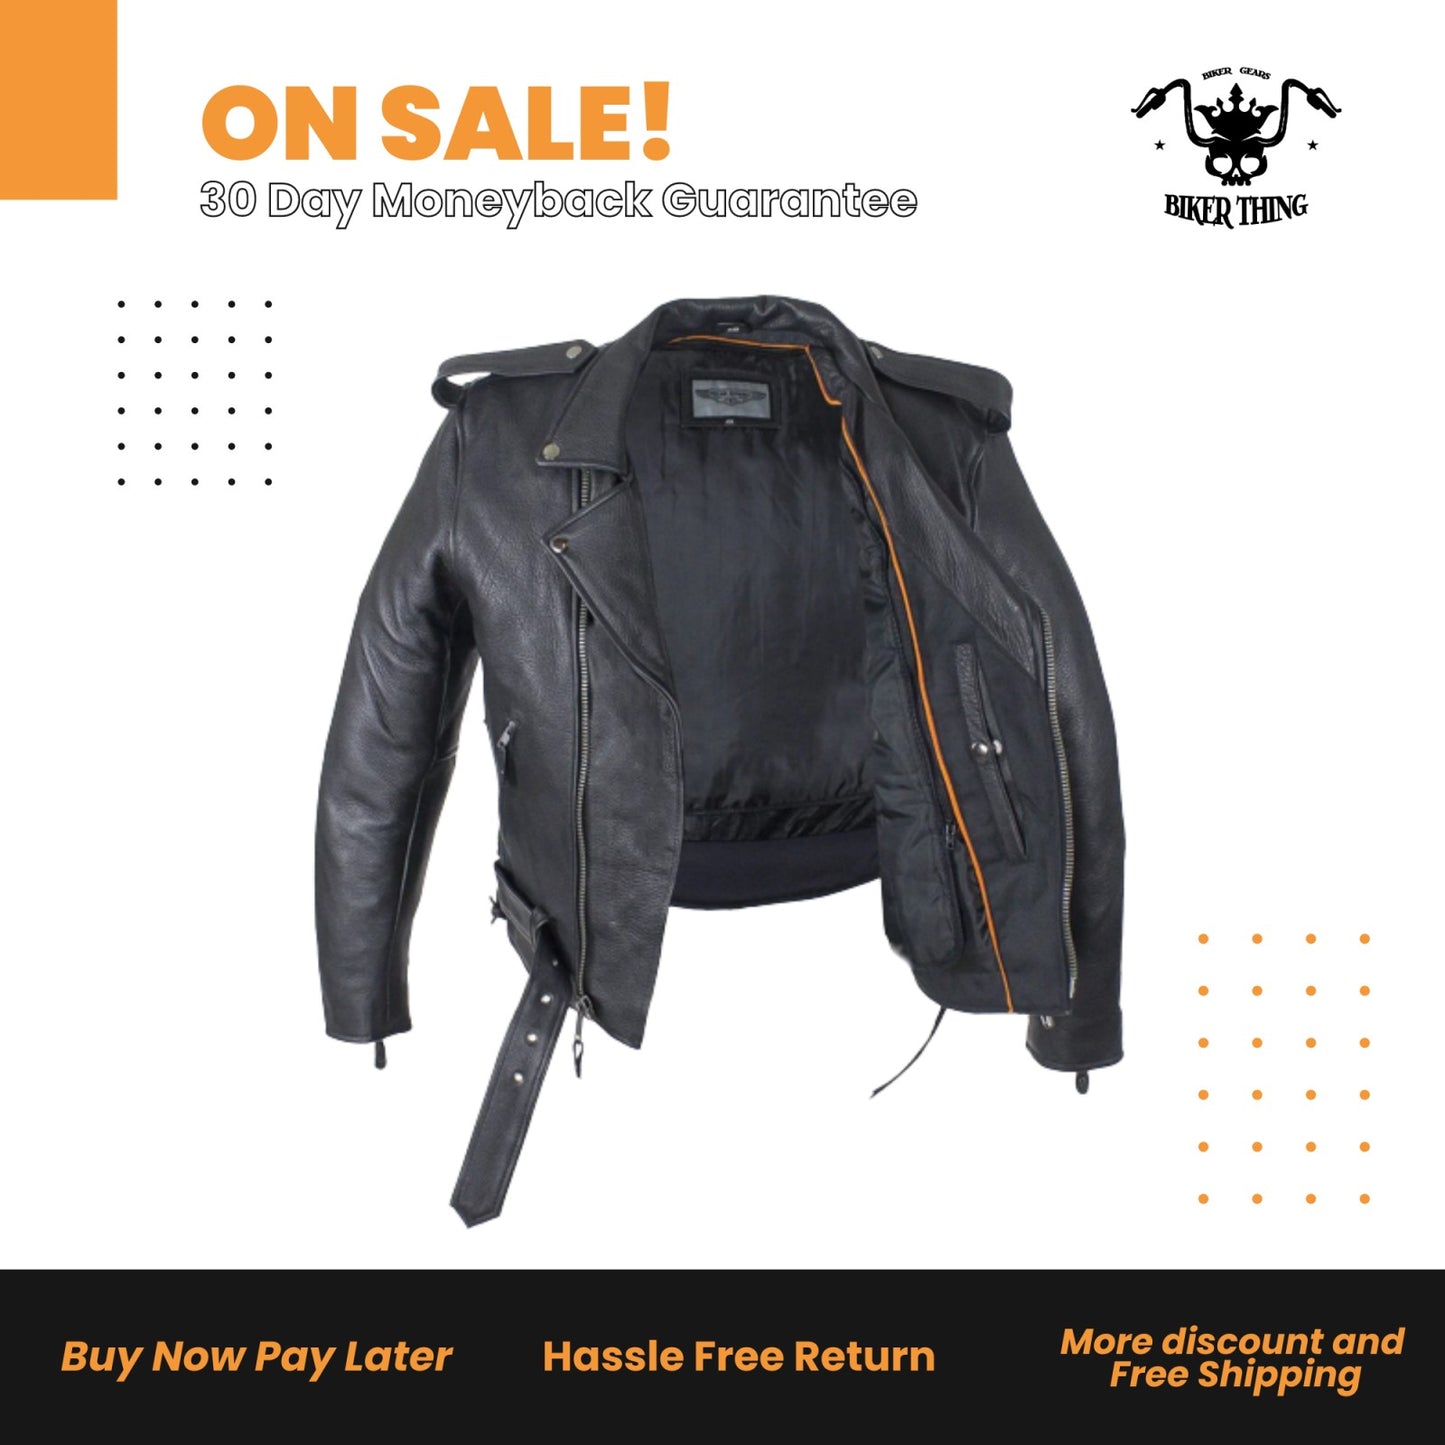 Mens Classic Police Style Motorcycle Jacket With Side Laces